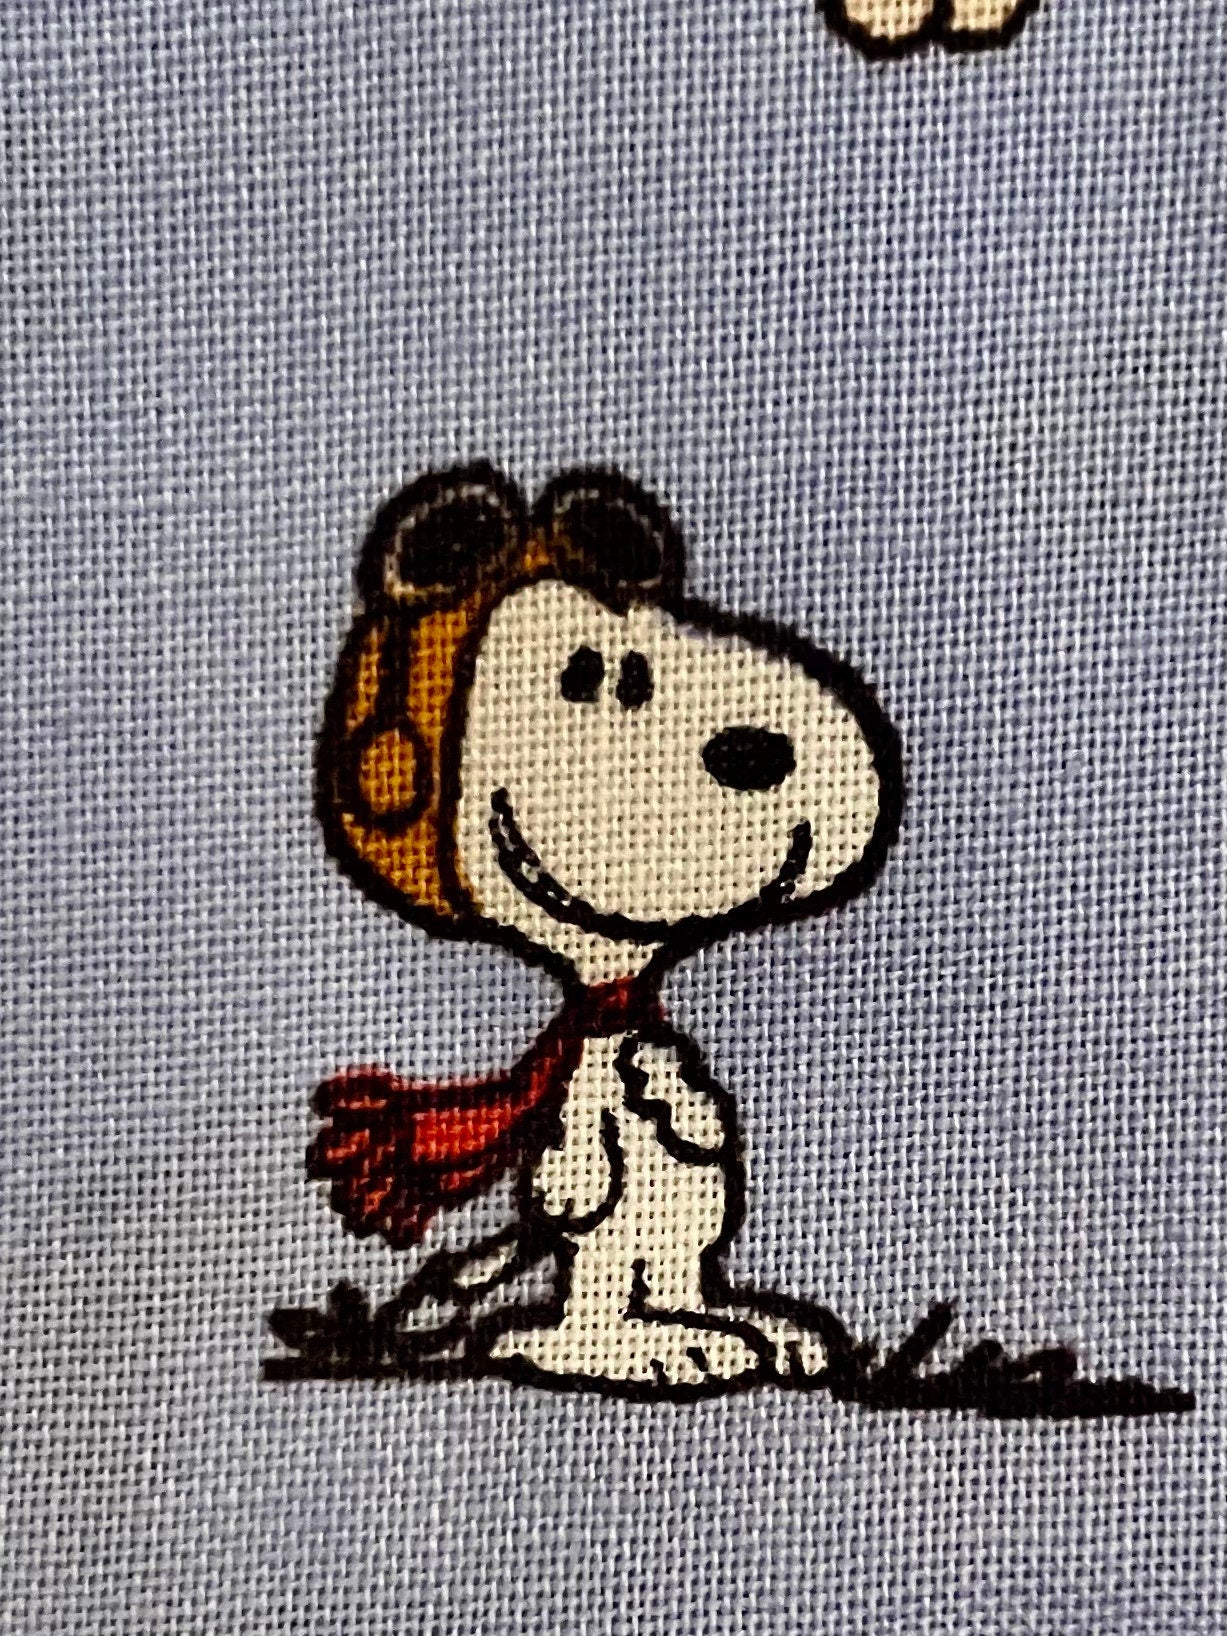 Cutest Snoopy Red Baron blanket ever!